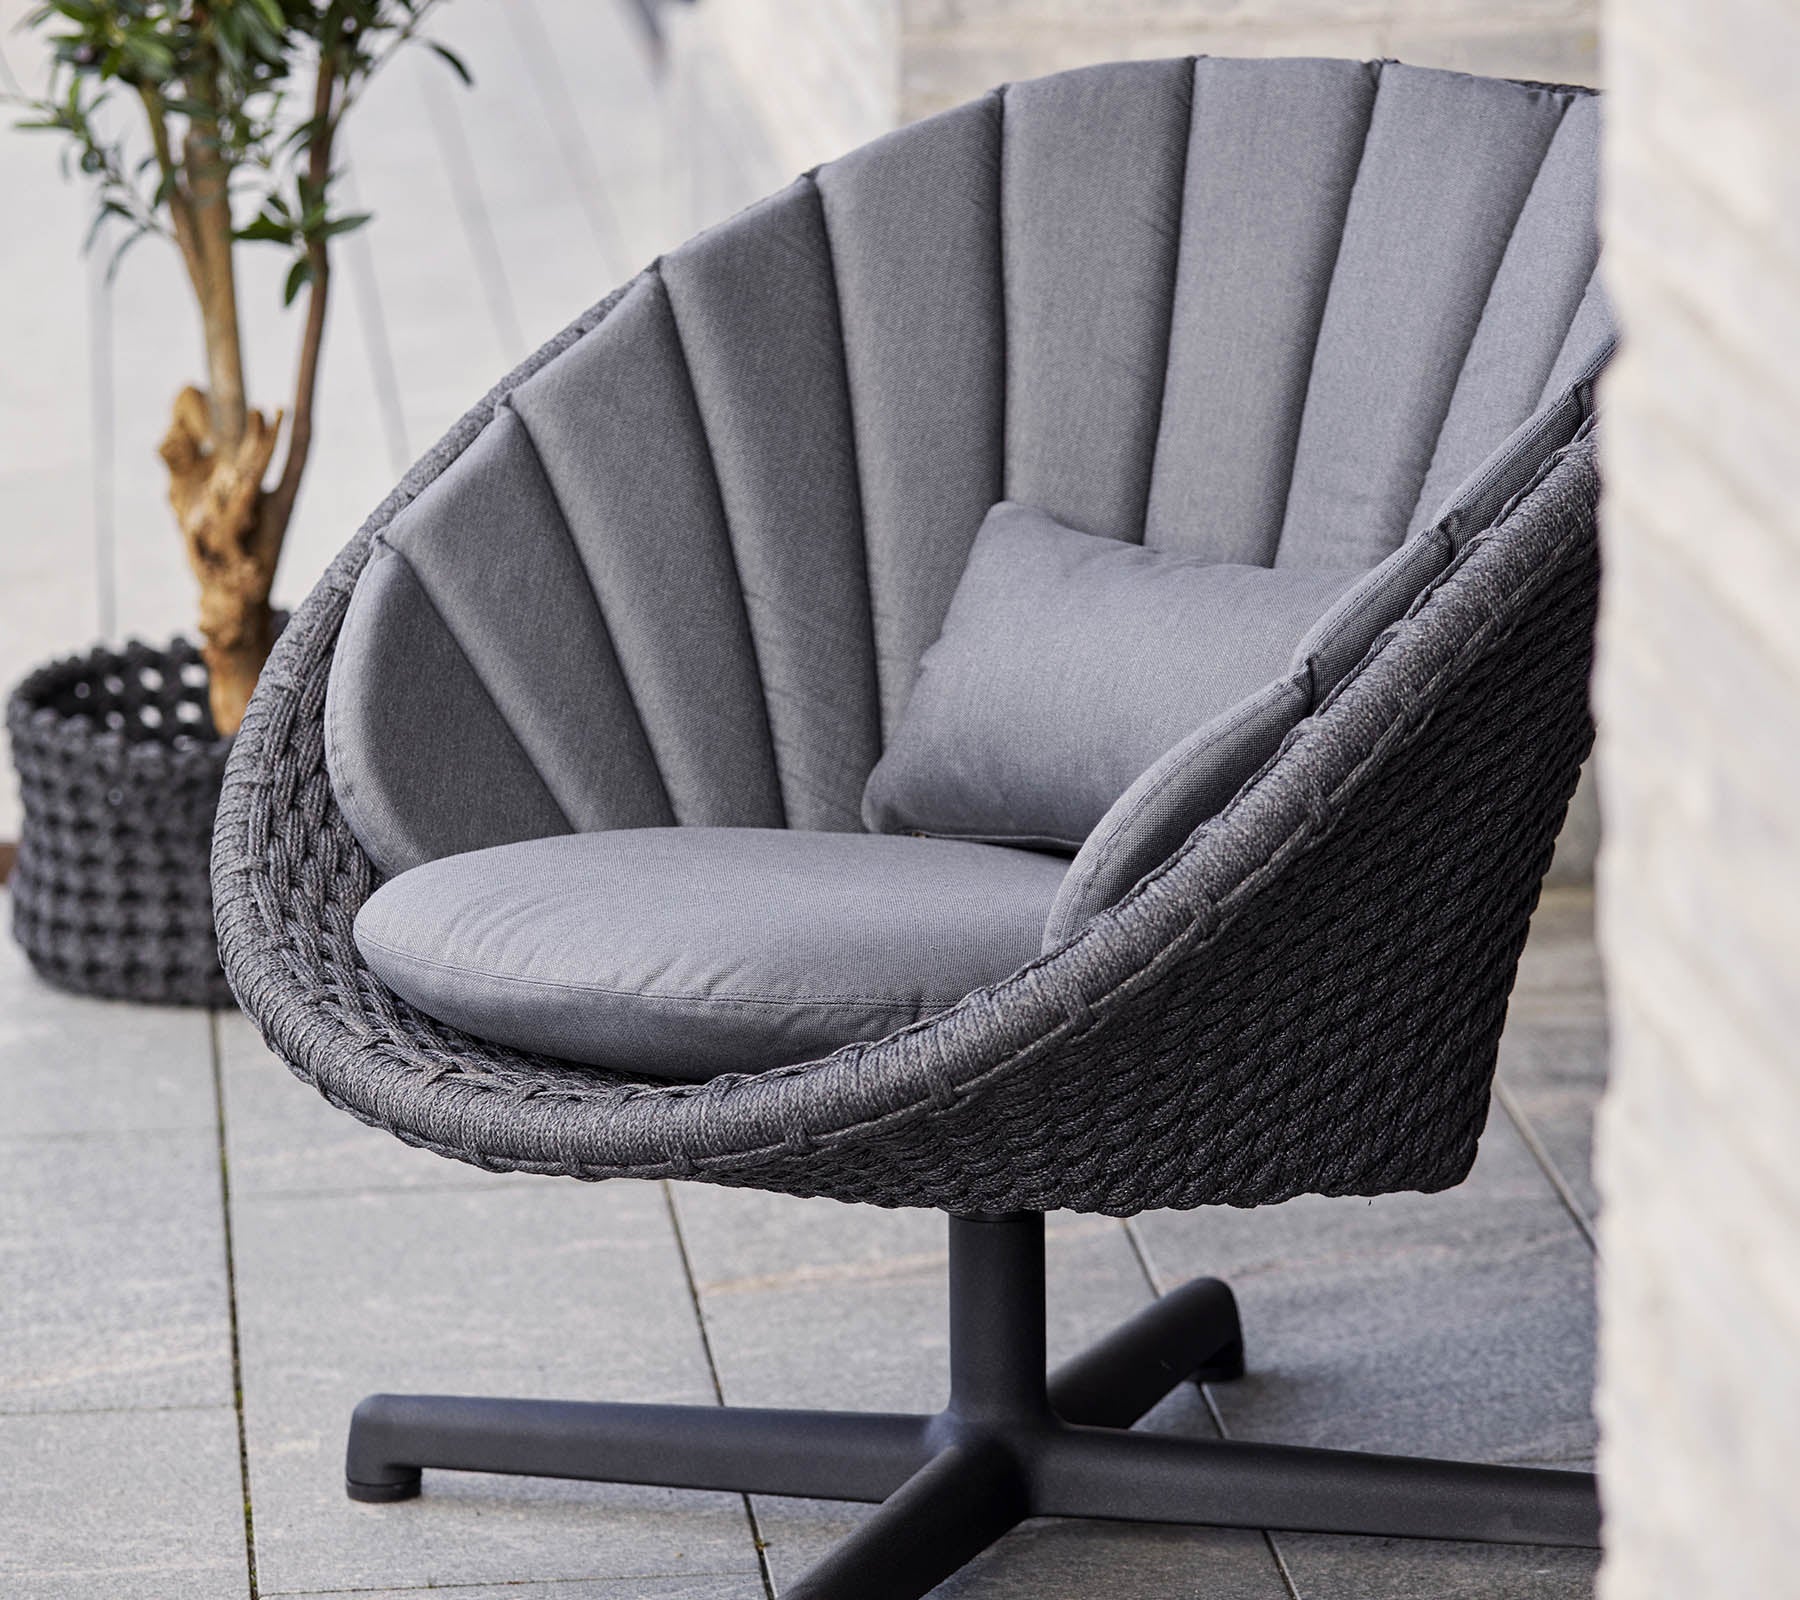 Peacock Outdoor Swivel Lounge Chair Lifestyle